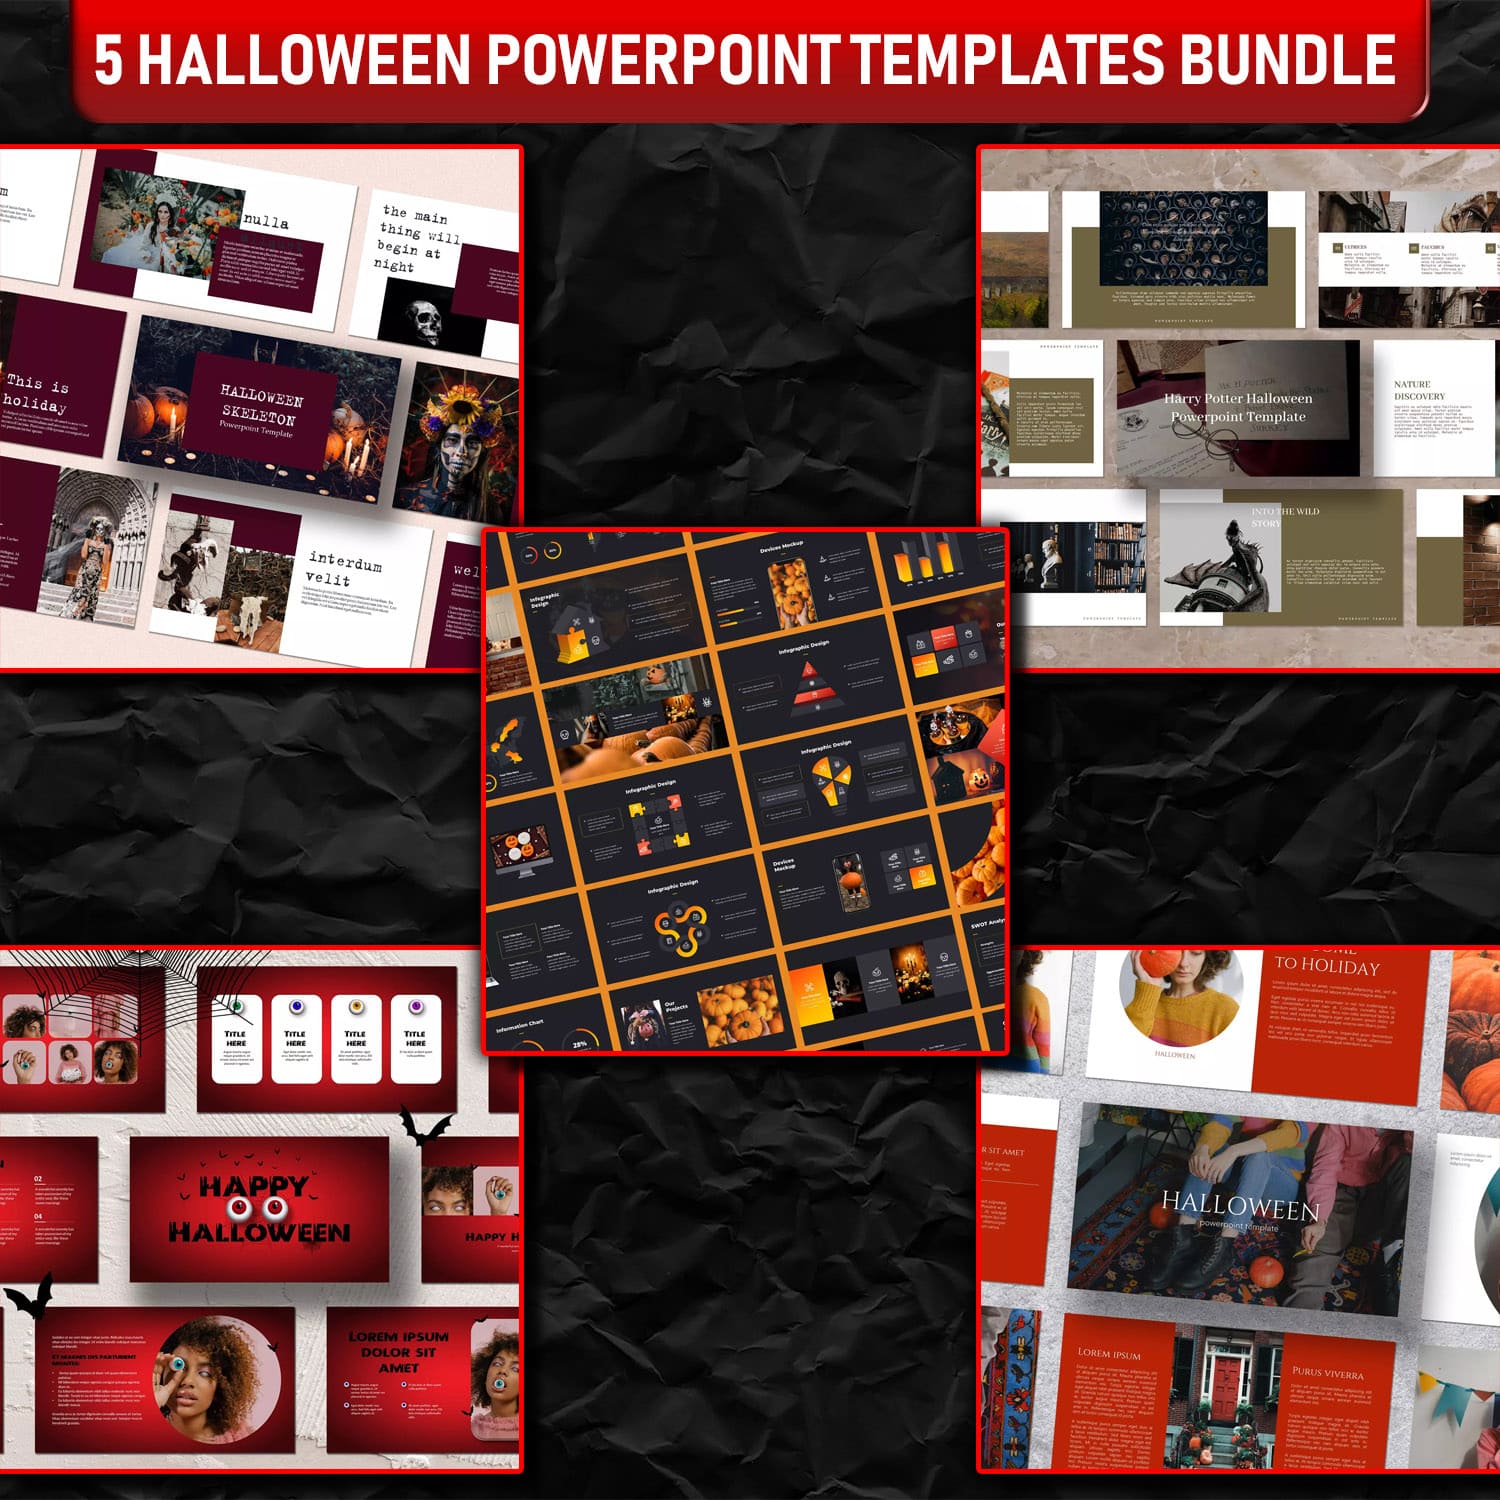 Halloween Powerpoint Templates Presentations Bundle cover image.